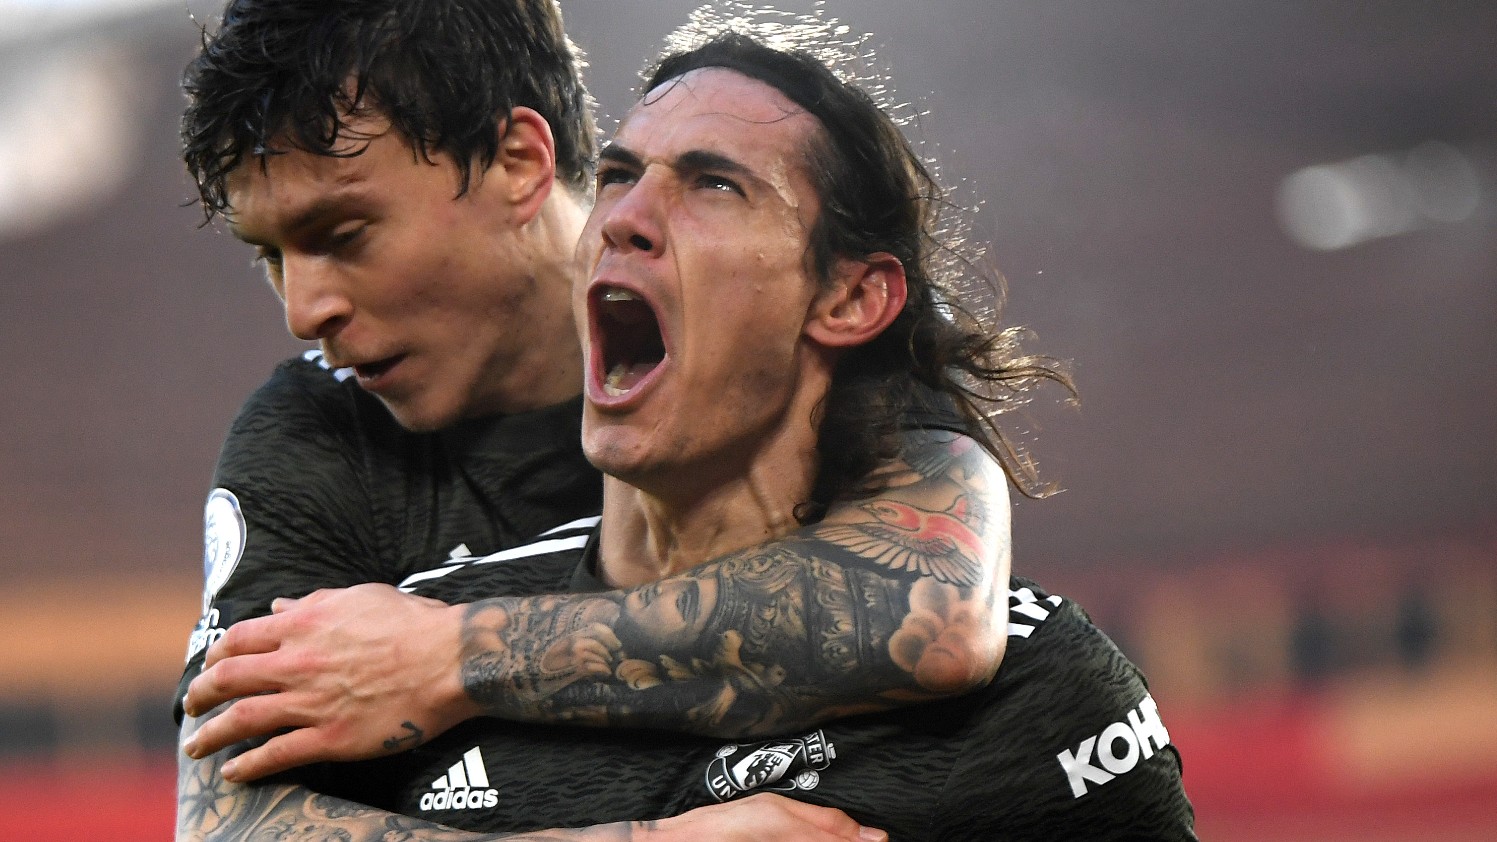 ‘Cavani is at a level many strikers can’t reach’ – Maguire lauds Manchester United’s ‘nightmare’ match-winner